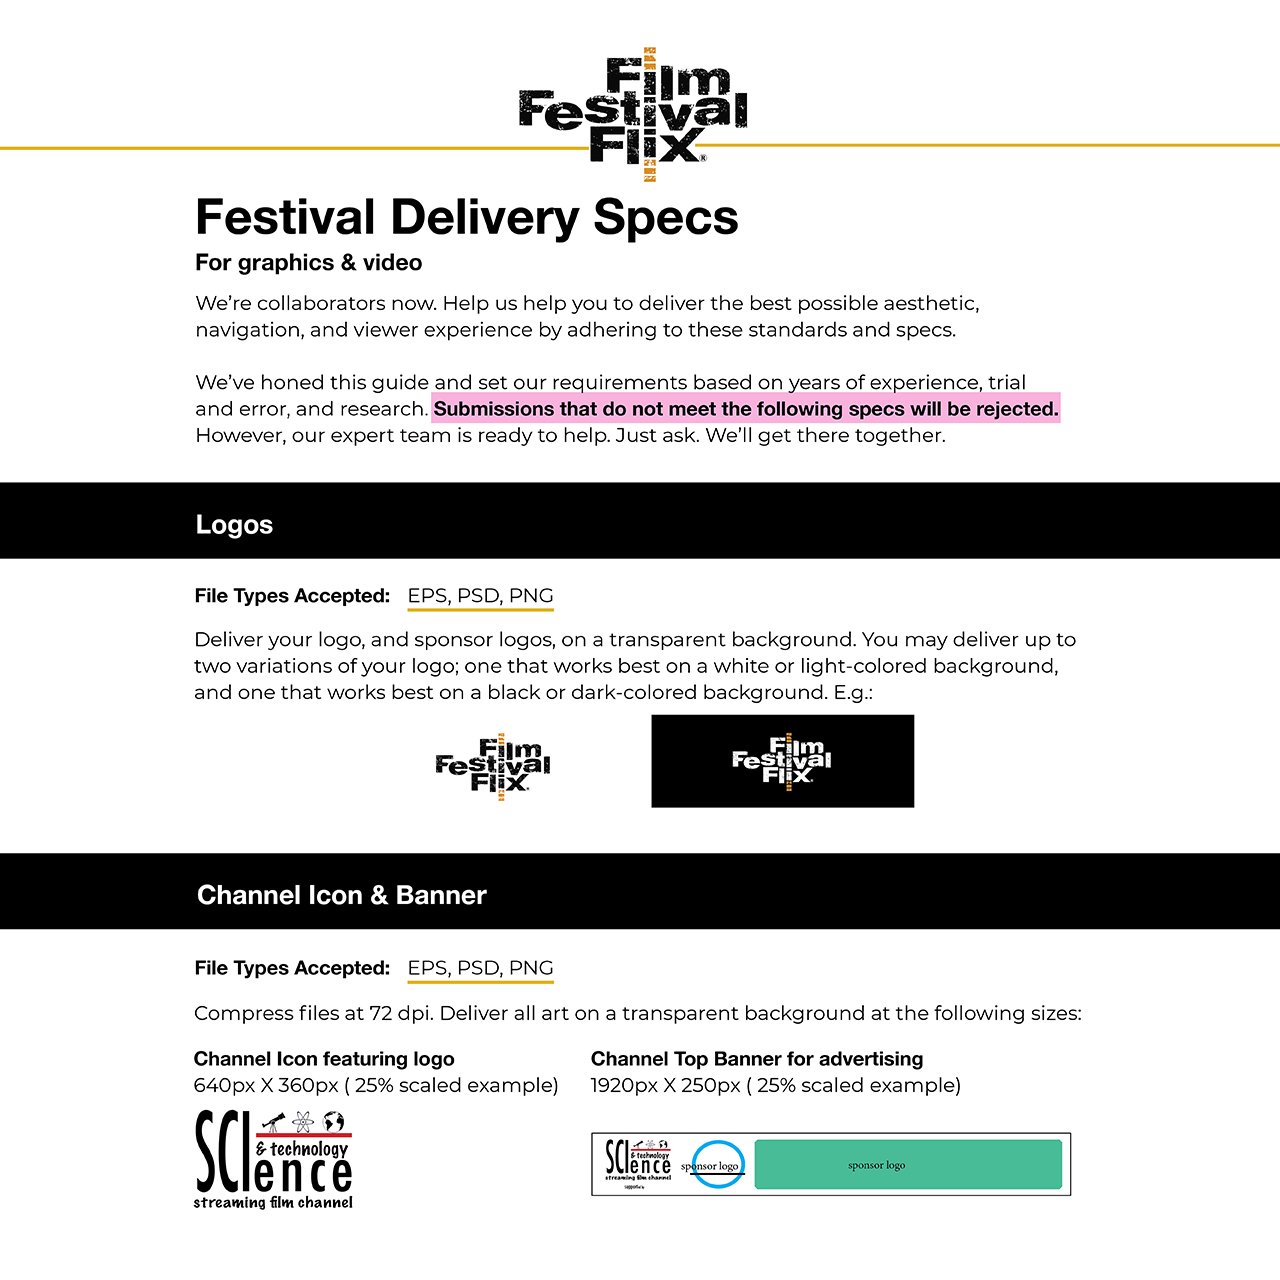 FFF Graphics and Video Delivery Specs for Festivals